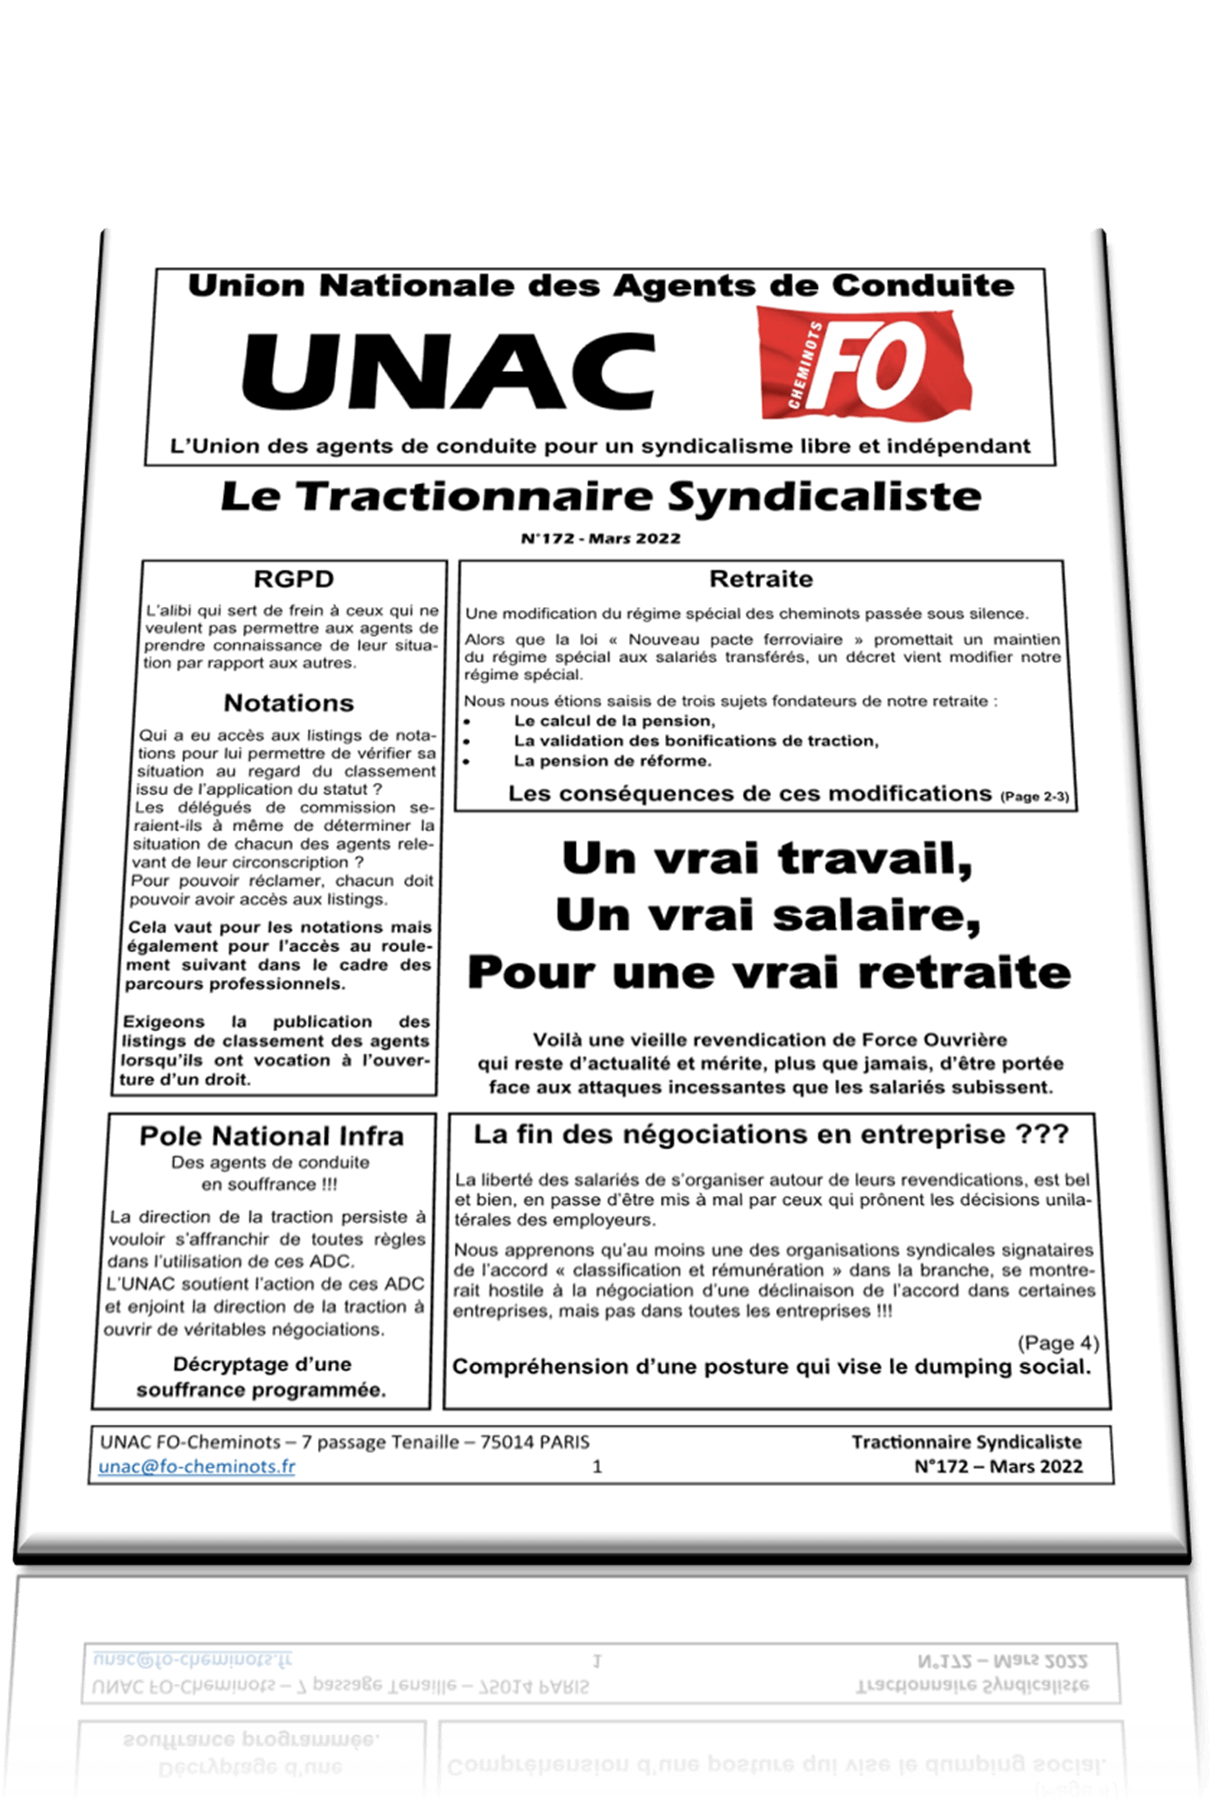 Le Tractionnaire Syndicaliste n°172 – mars 2022